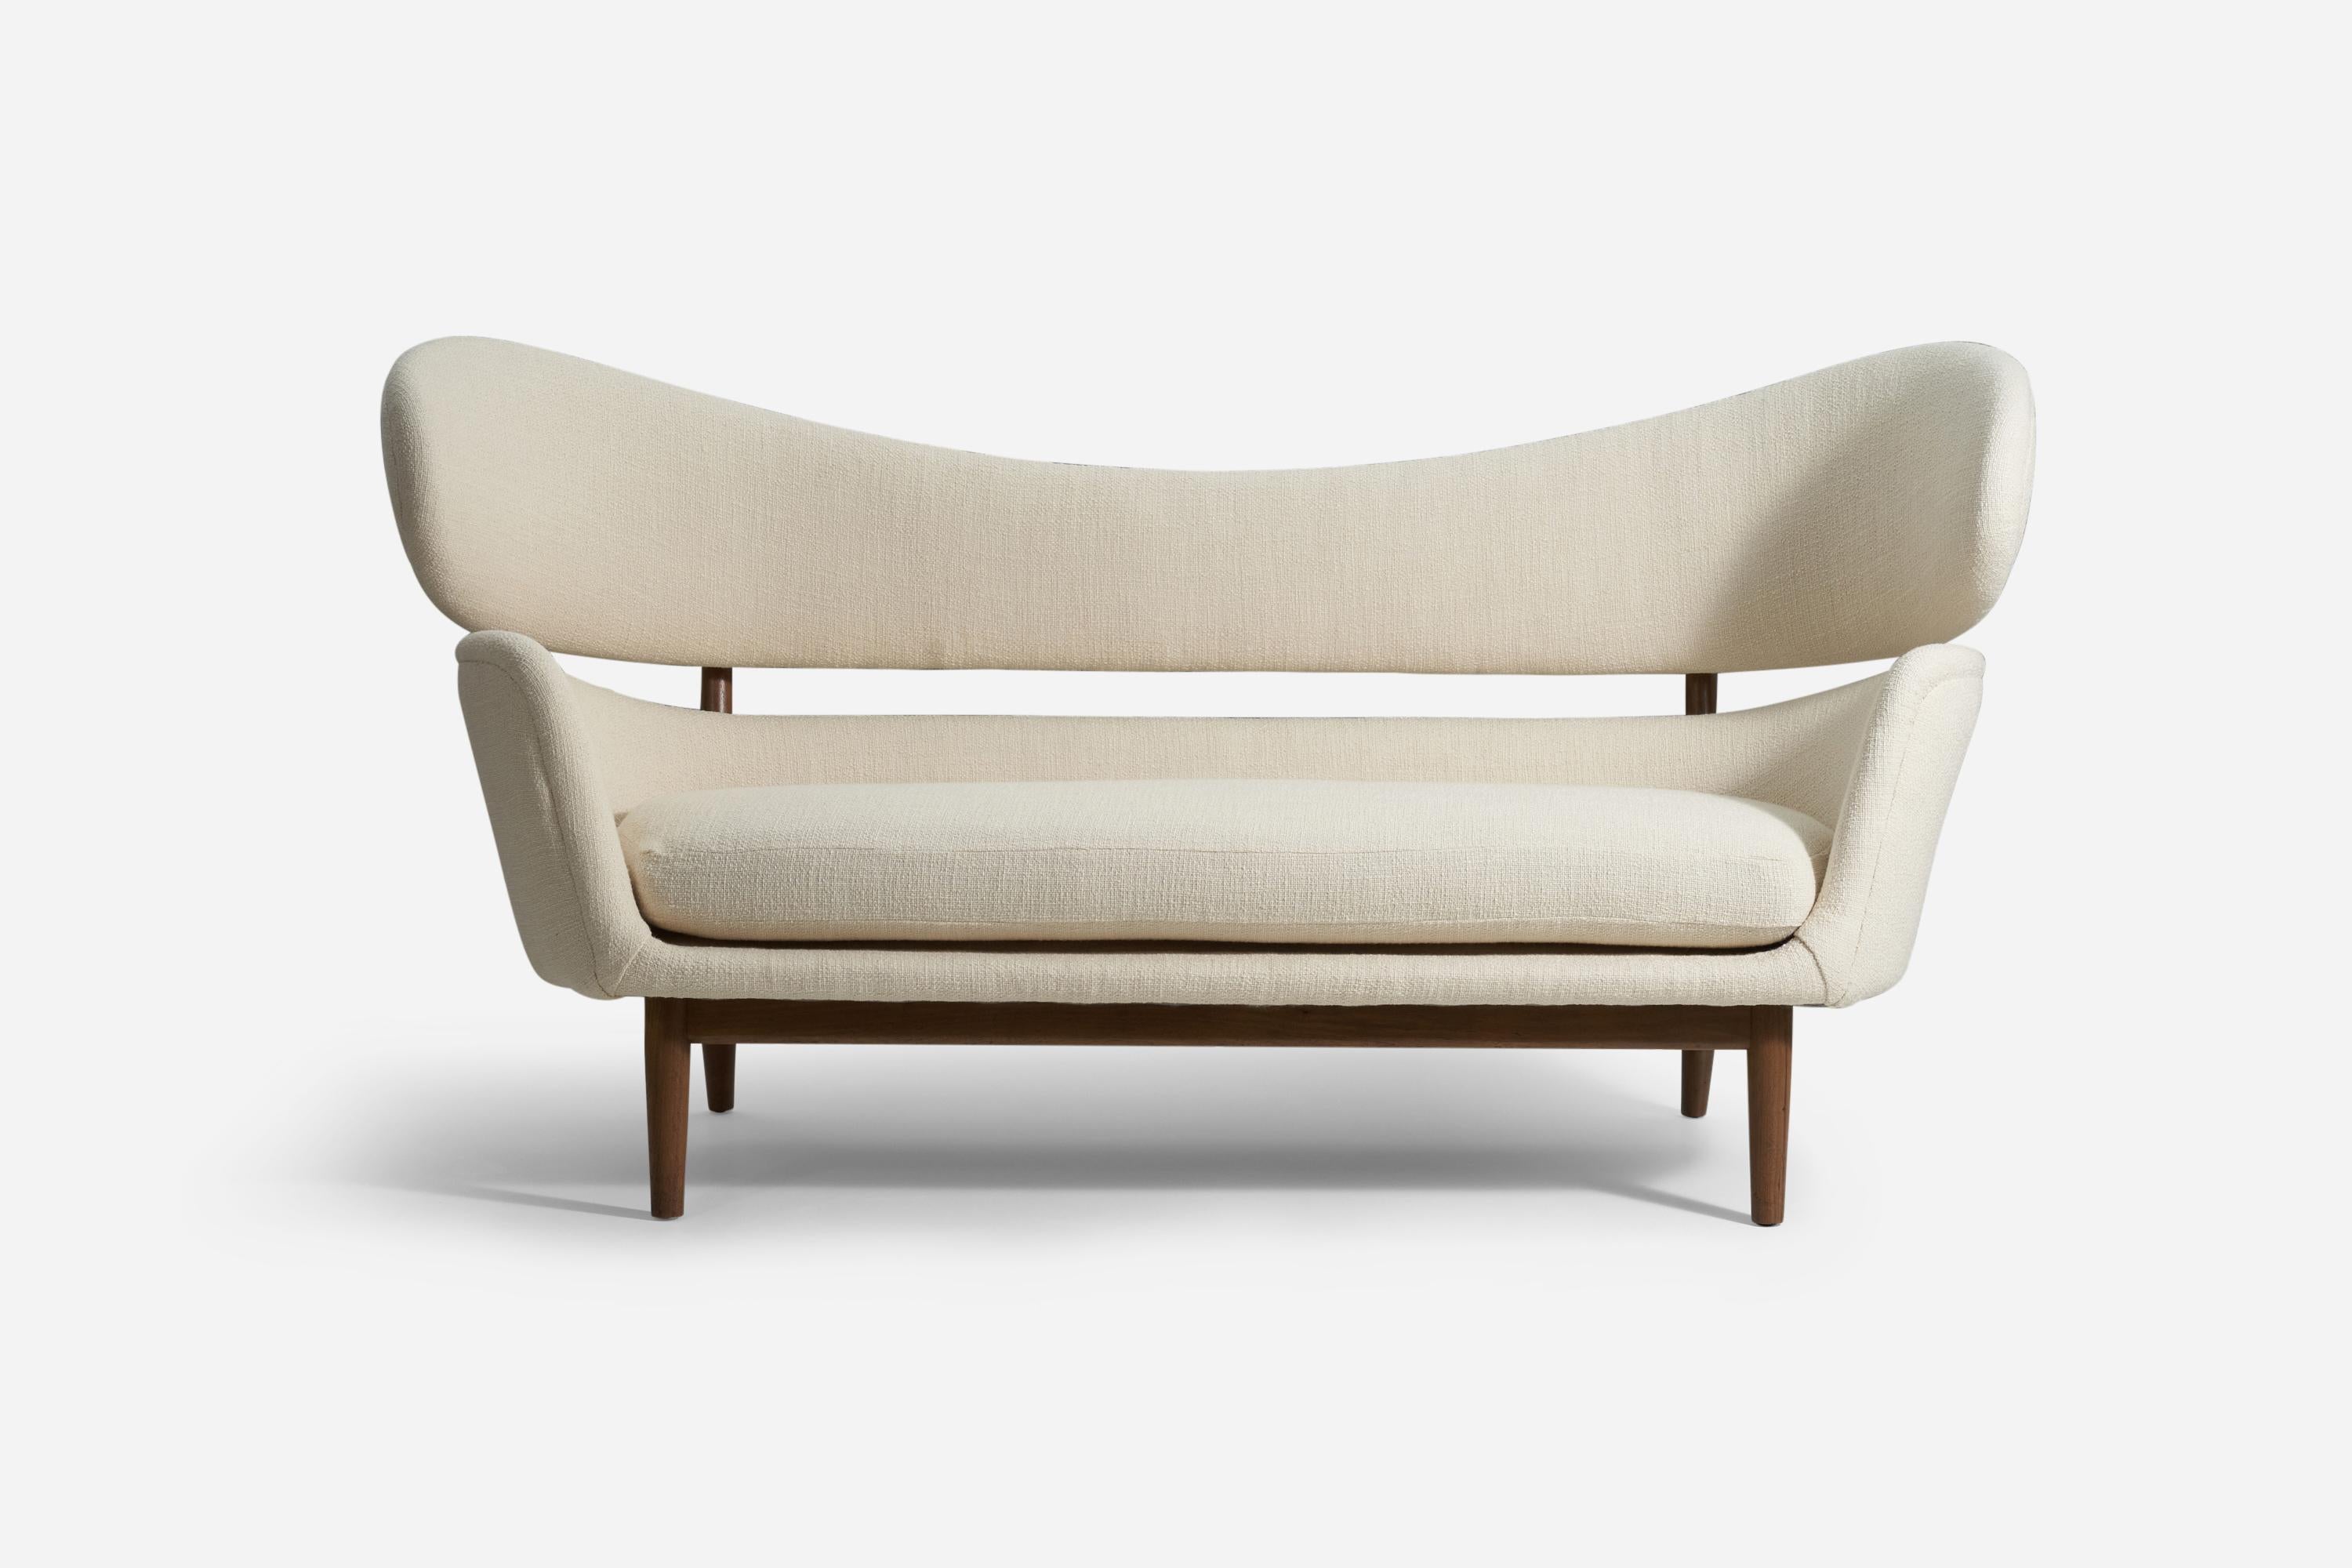 A rare and important sofa, designed by Finn Juhl in 1951 for Baker Furniture Company, Michigan. 

Introduced to the American design community by Edgar Kaufmann Jr, an art collector and director of the Industrial Design Department at the Museum of